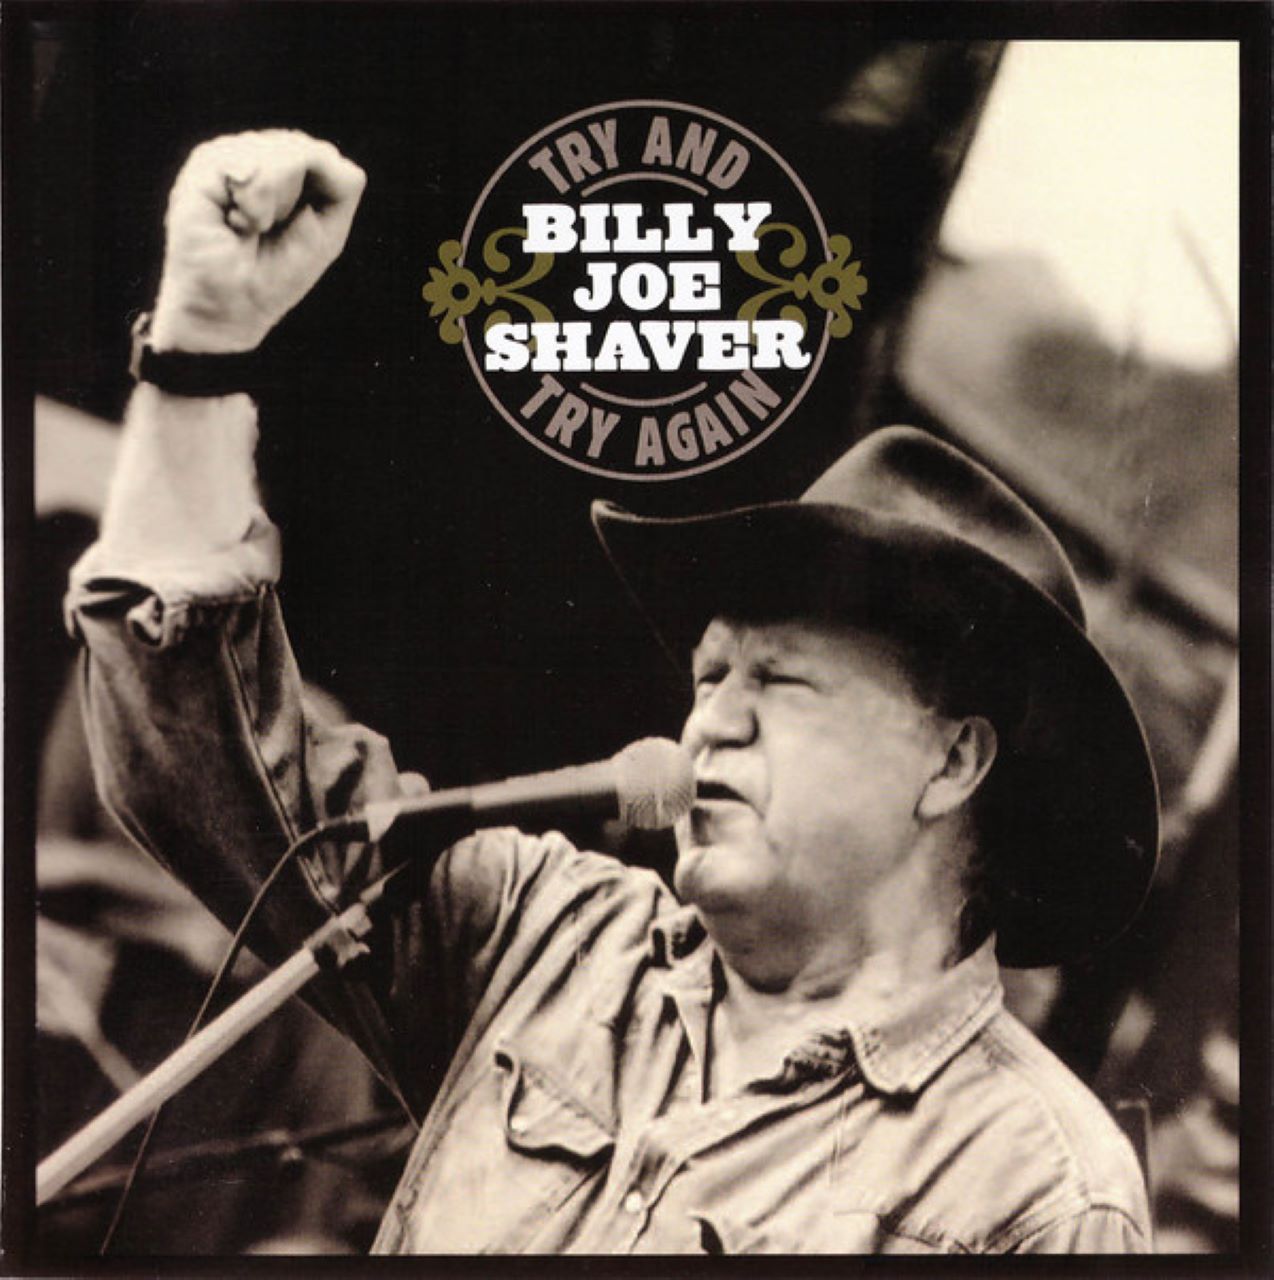 Billy Joe Shaver - Try And Try Again cover album